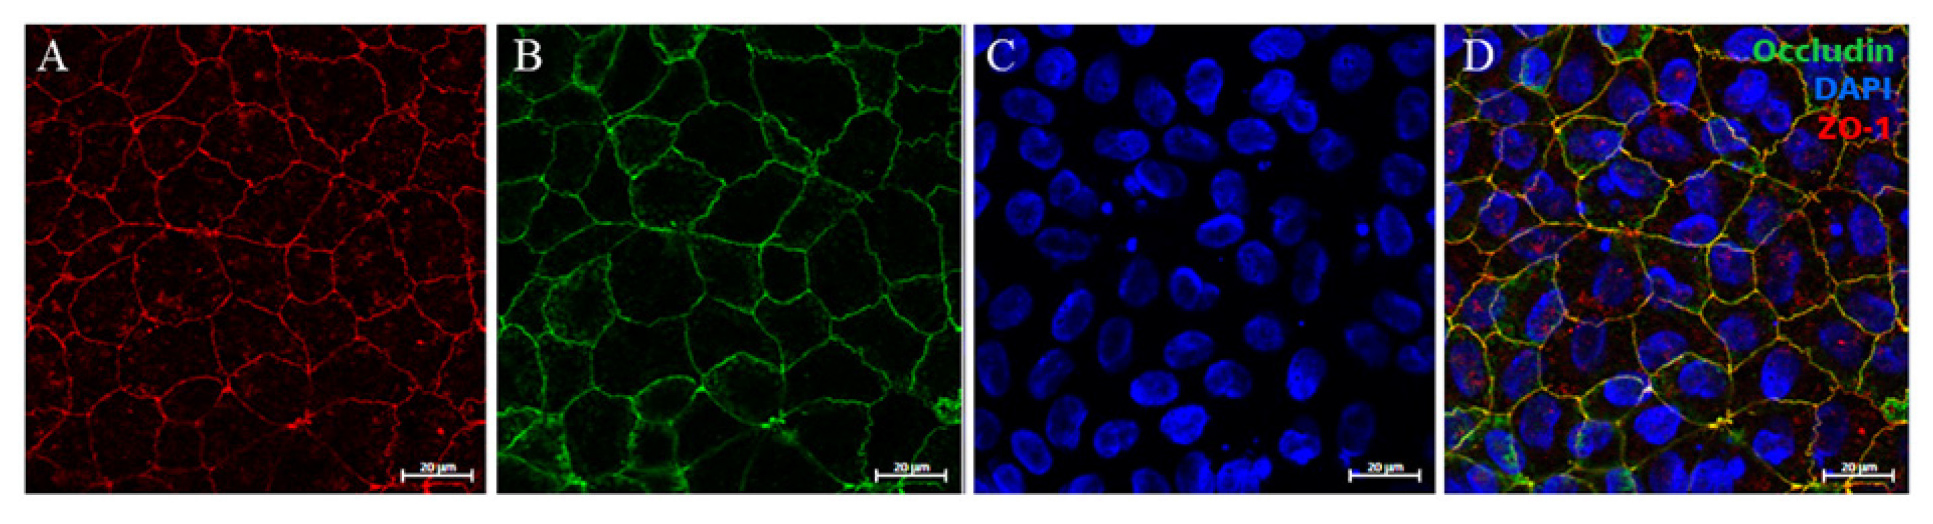 Indirect immunofluorescence staining of tight junction proteins from untreated Caco-2 cells